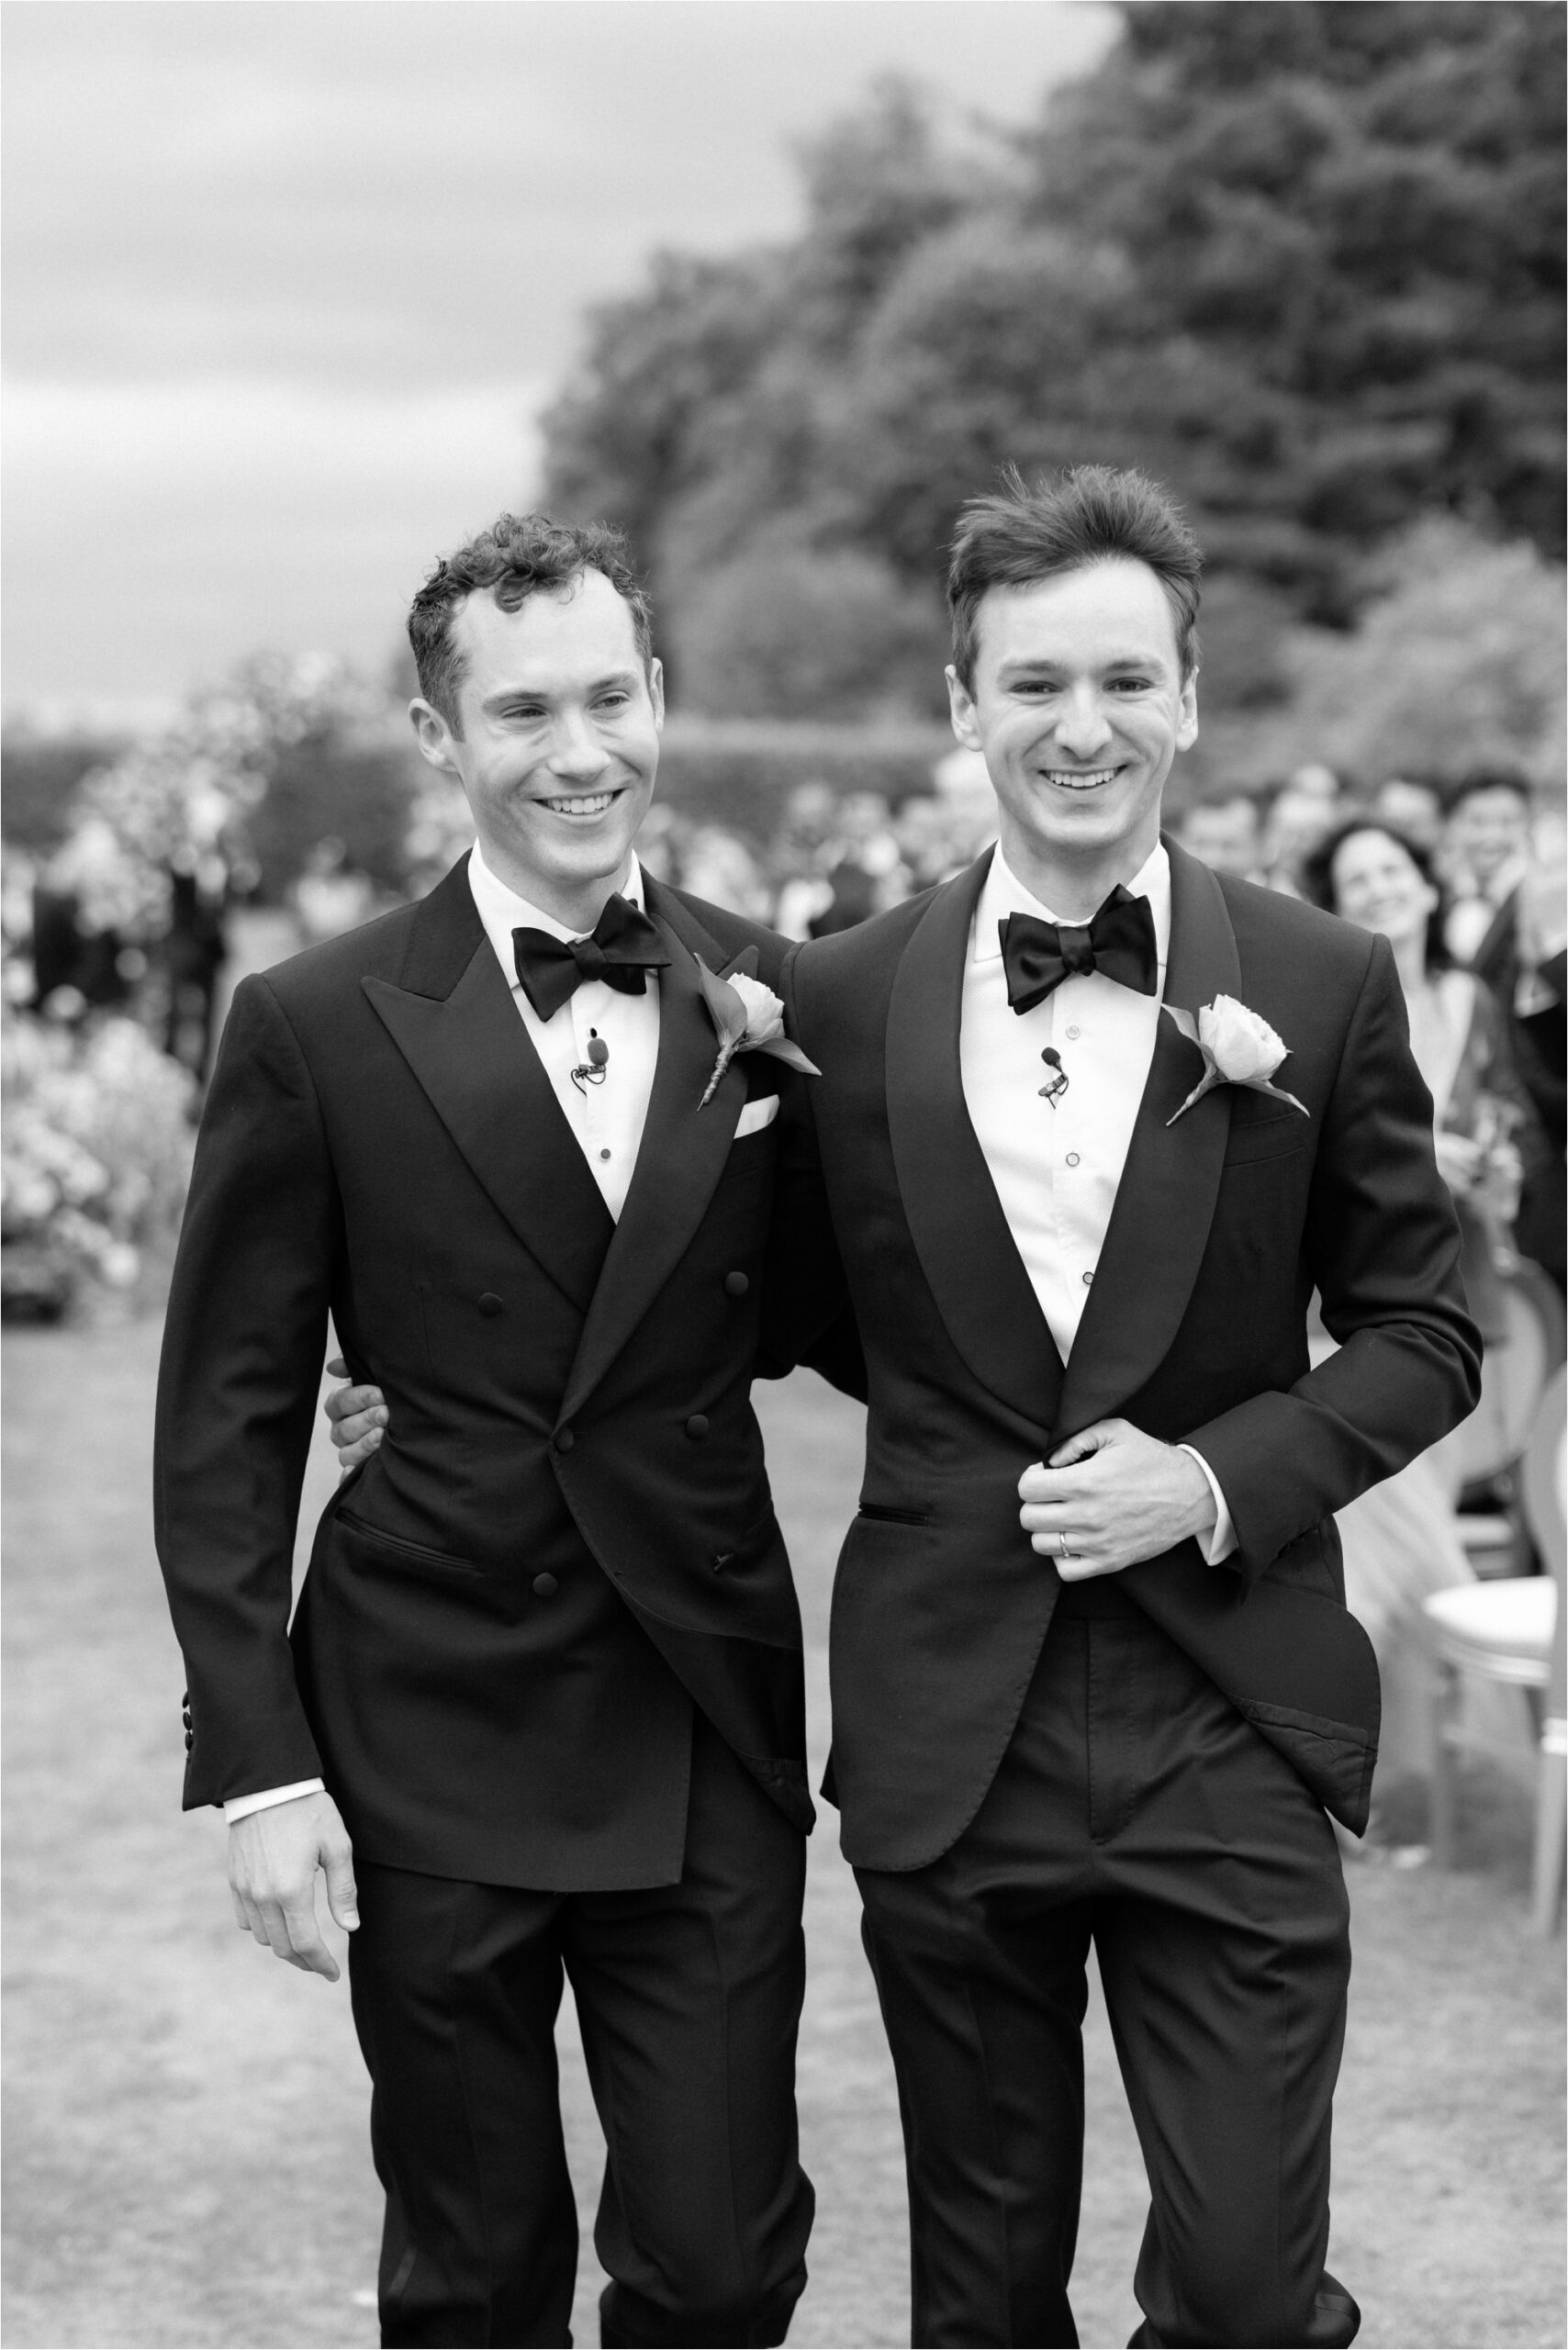 Two grooms get married at Blenheim Palace